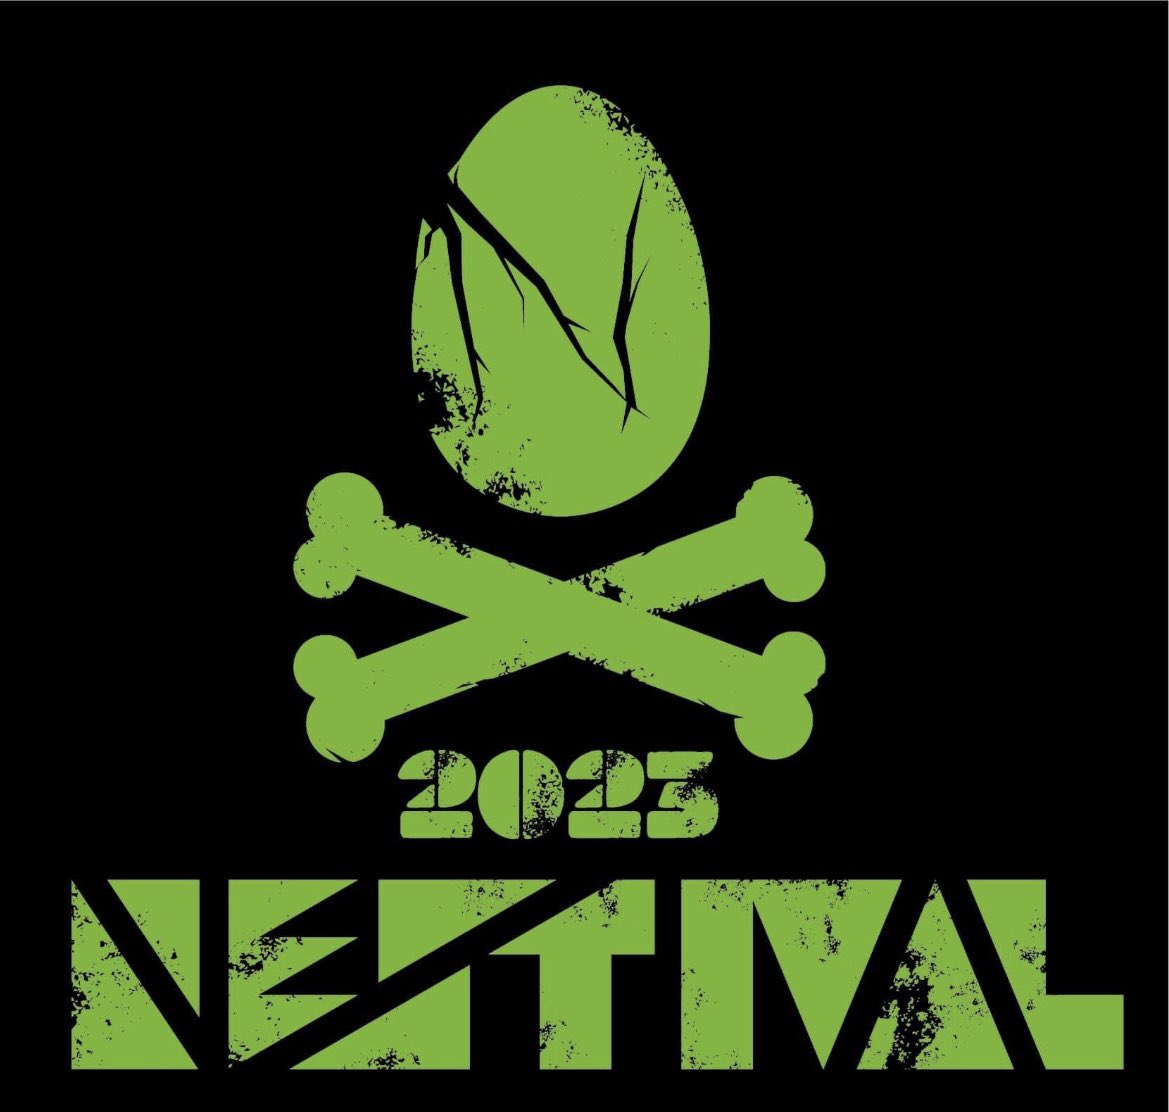 We’re playing Nestival today @thebirdsnestpub in Deptford